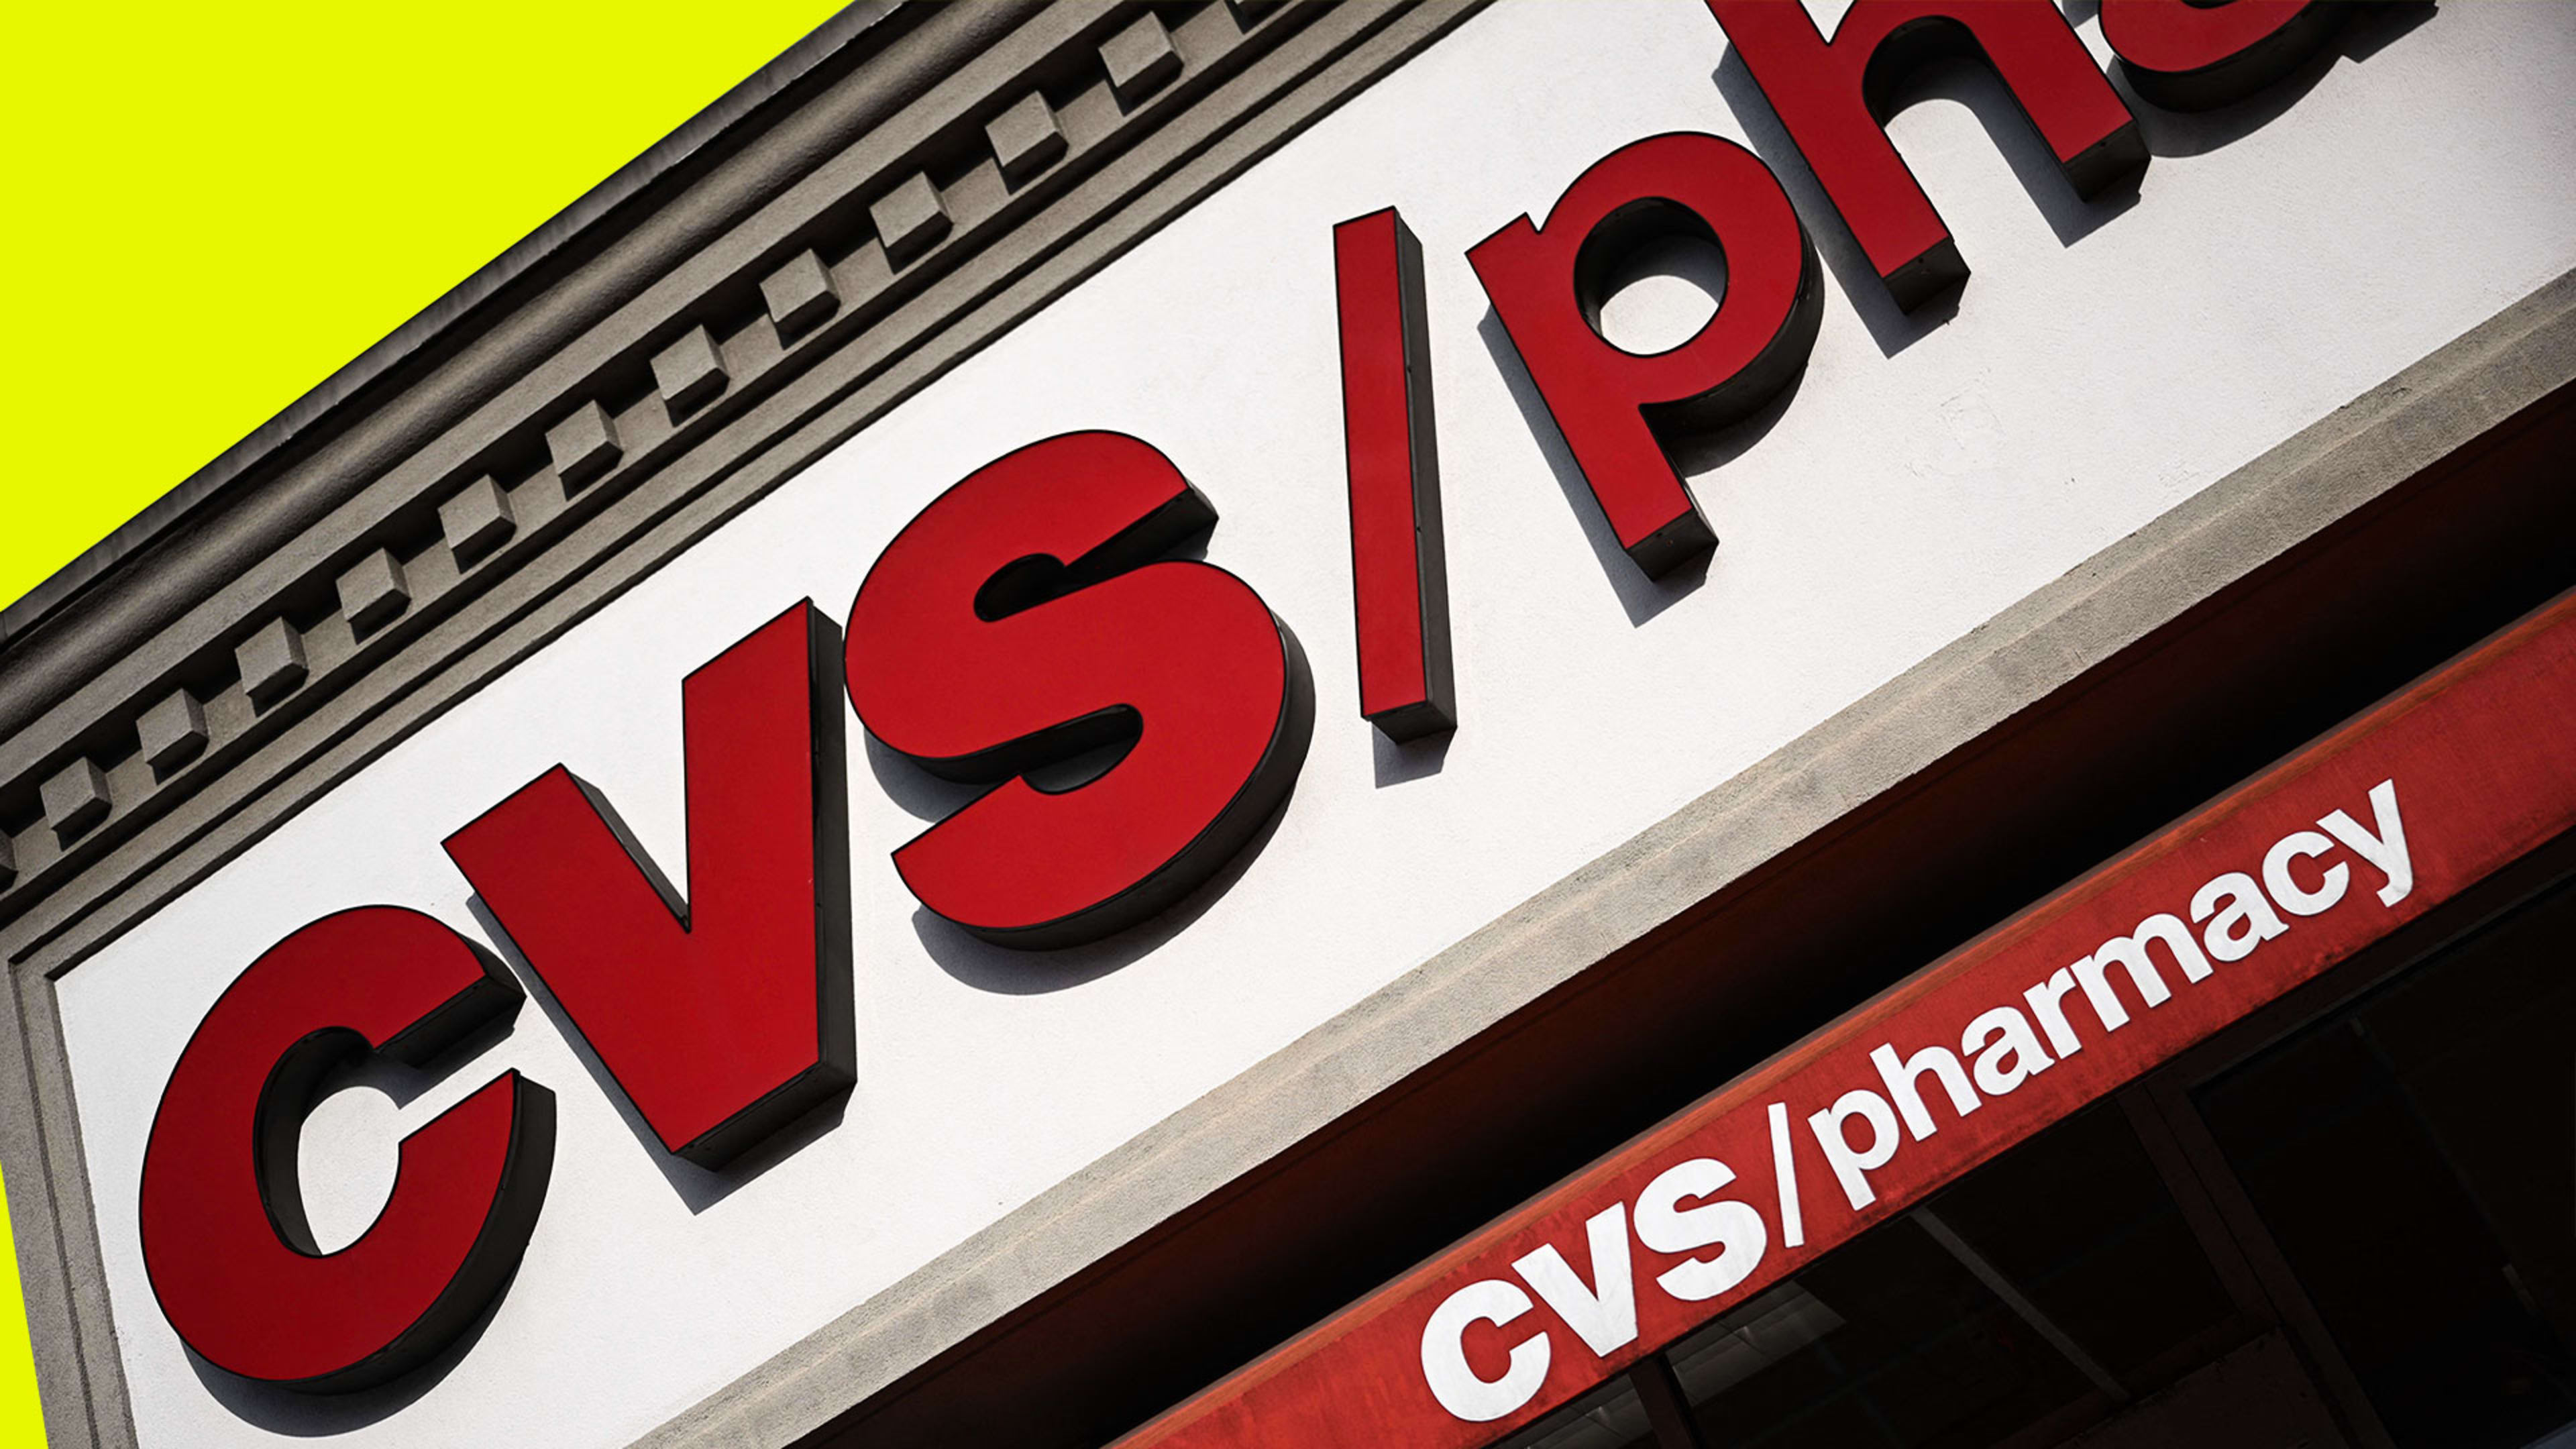 Some CVS pharmacies face another staff walkout as wait times for COVID vaccines grow